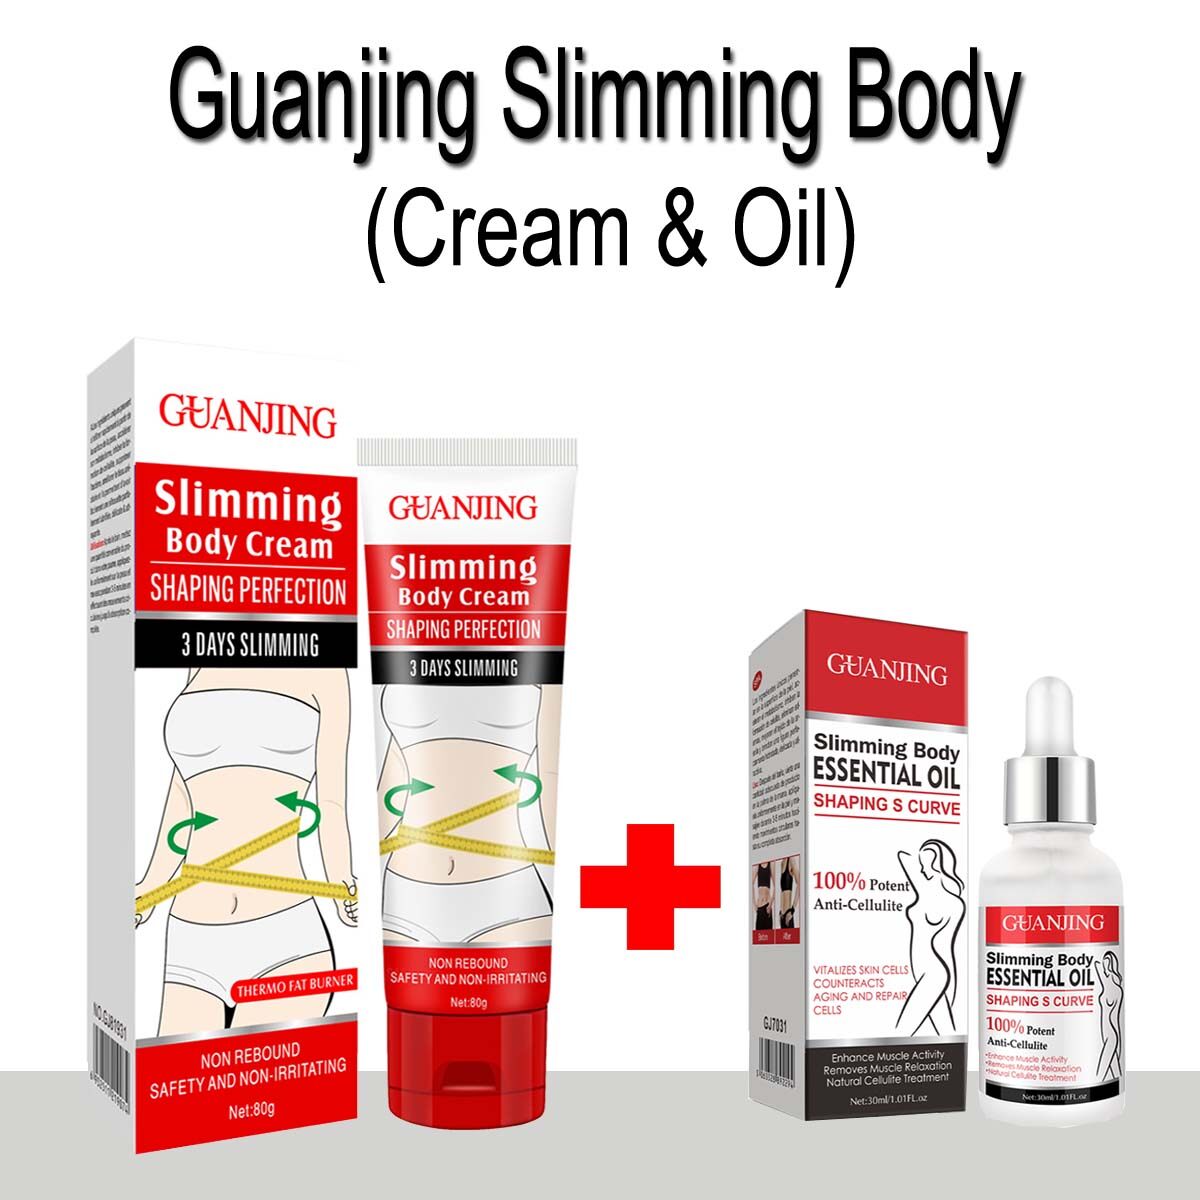 GUANJING Slimming Body Shaping & Perfection Cream & Oil